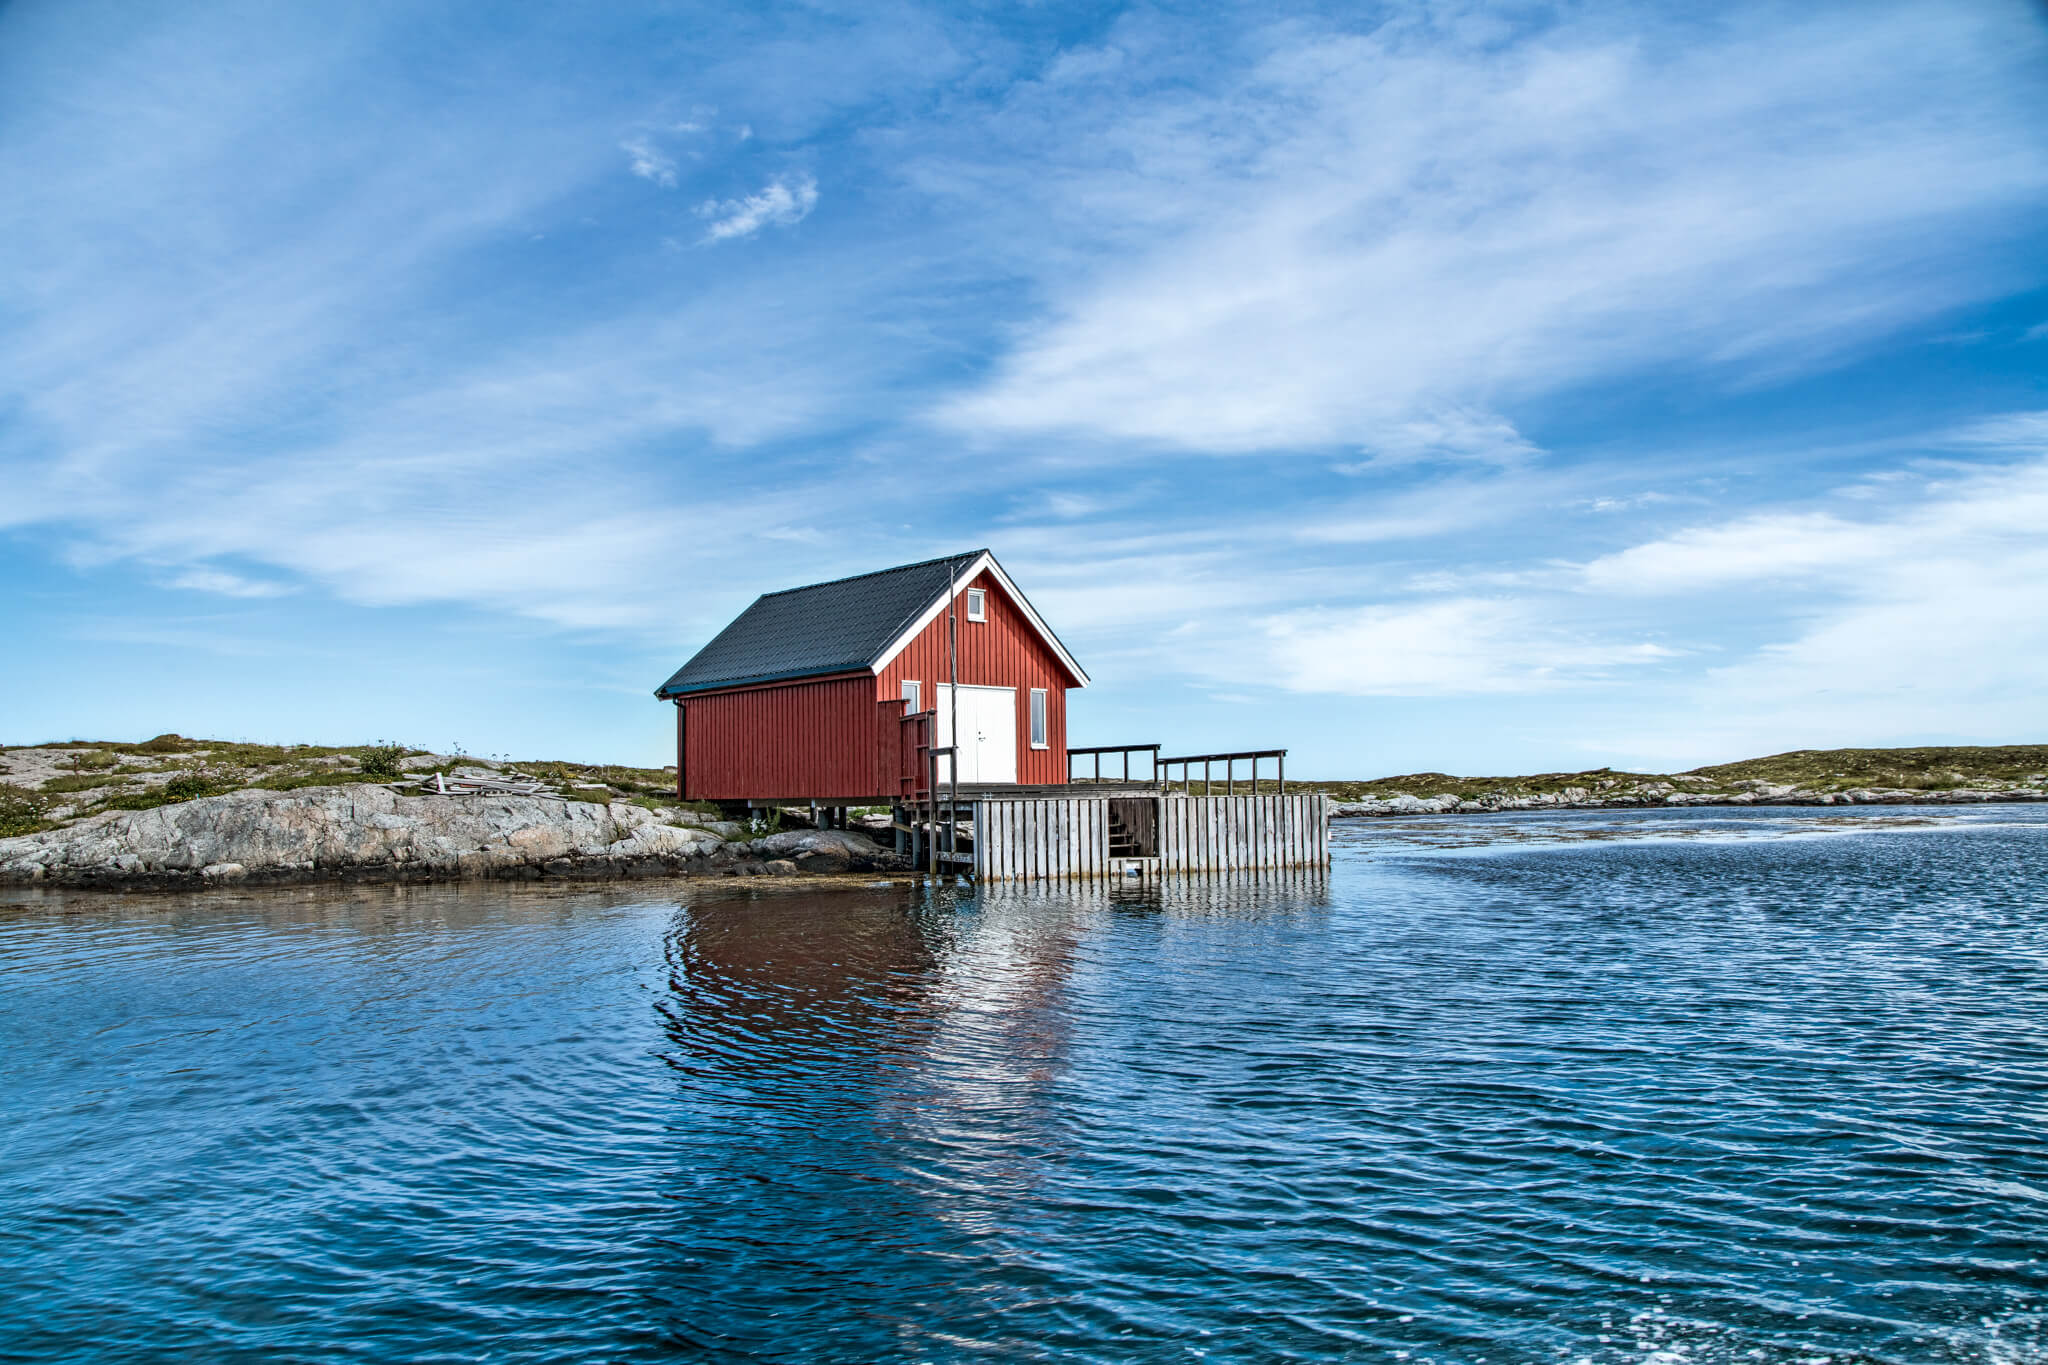 Idyll on the water: the red fishing hut